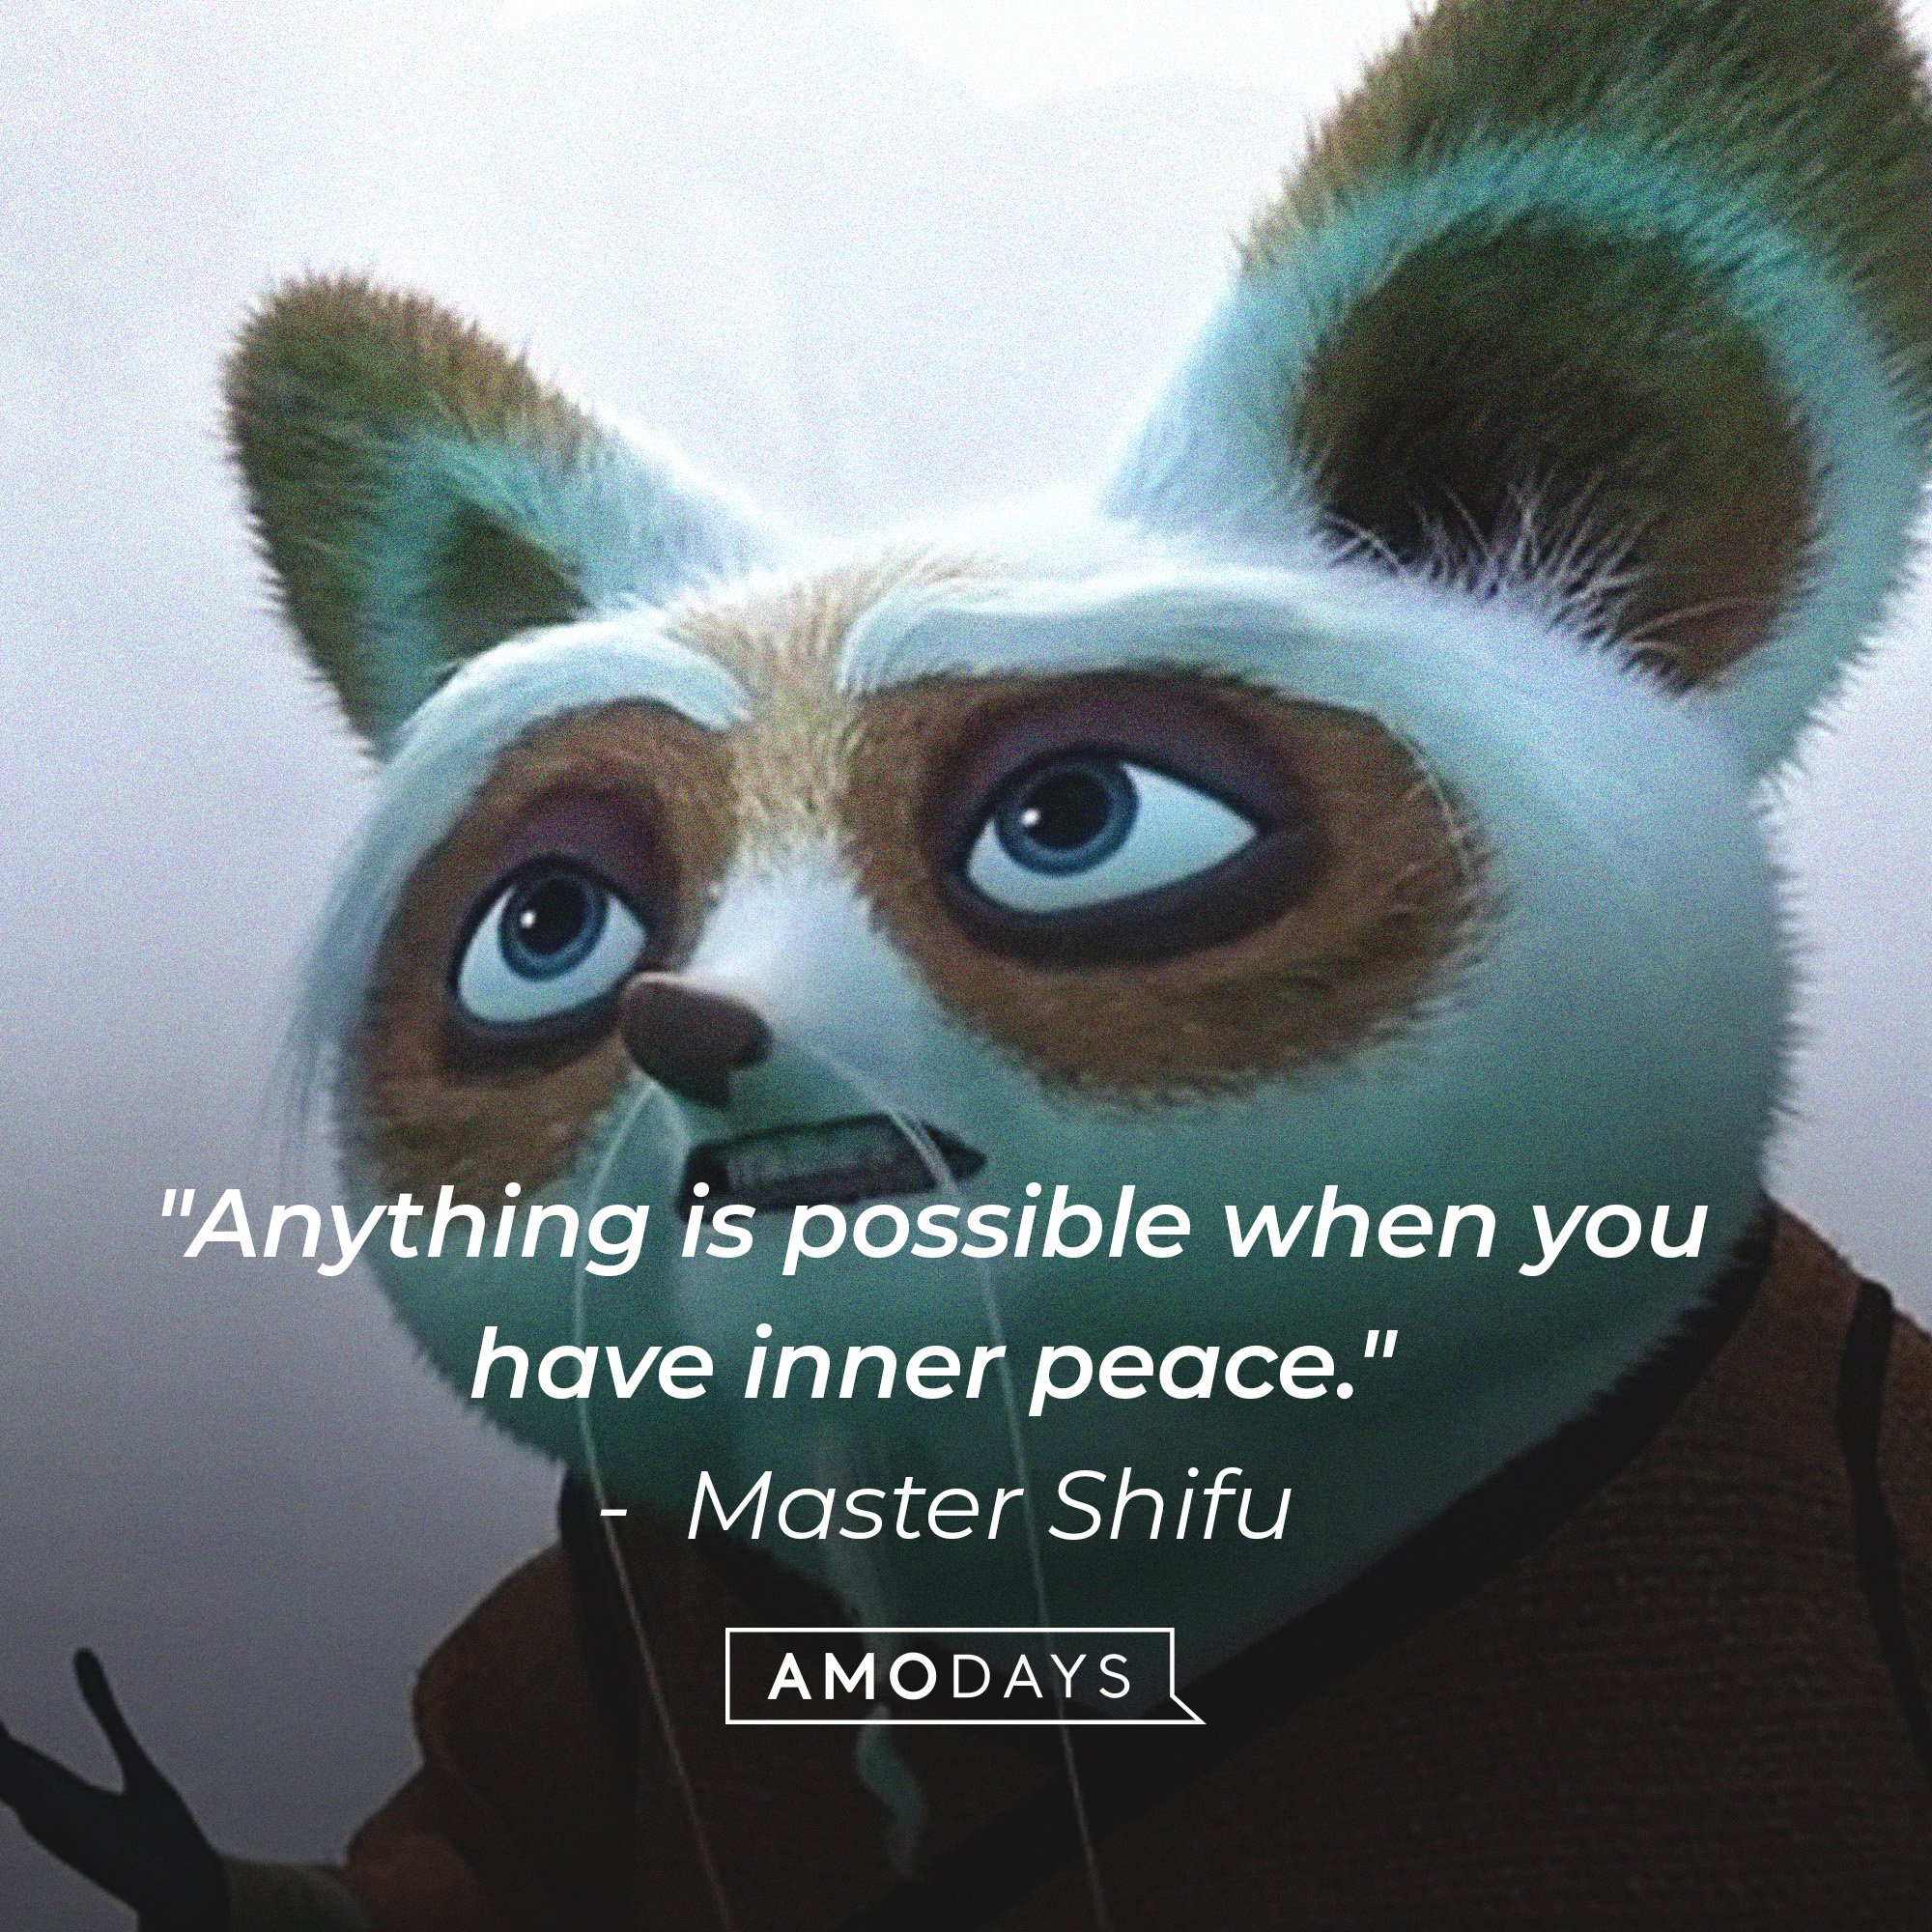 Master Shifu’s quote: "Anything is possible when you have inner peace." | Image: AmoDays